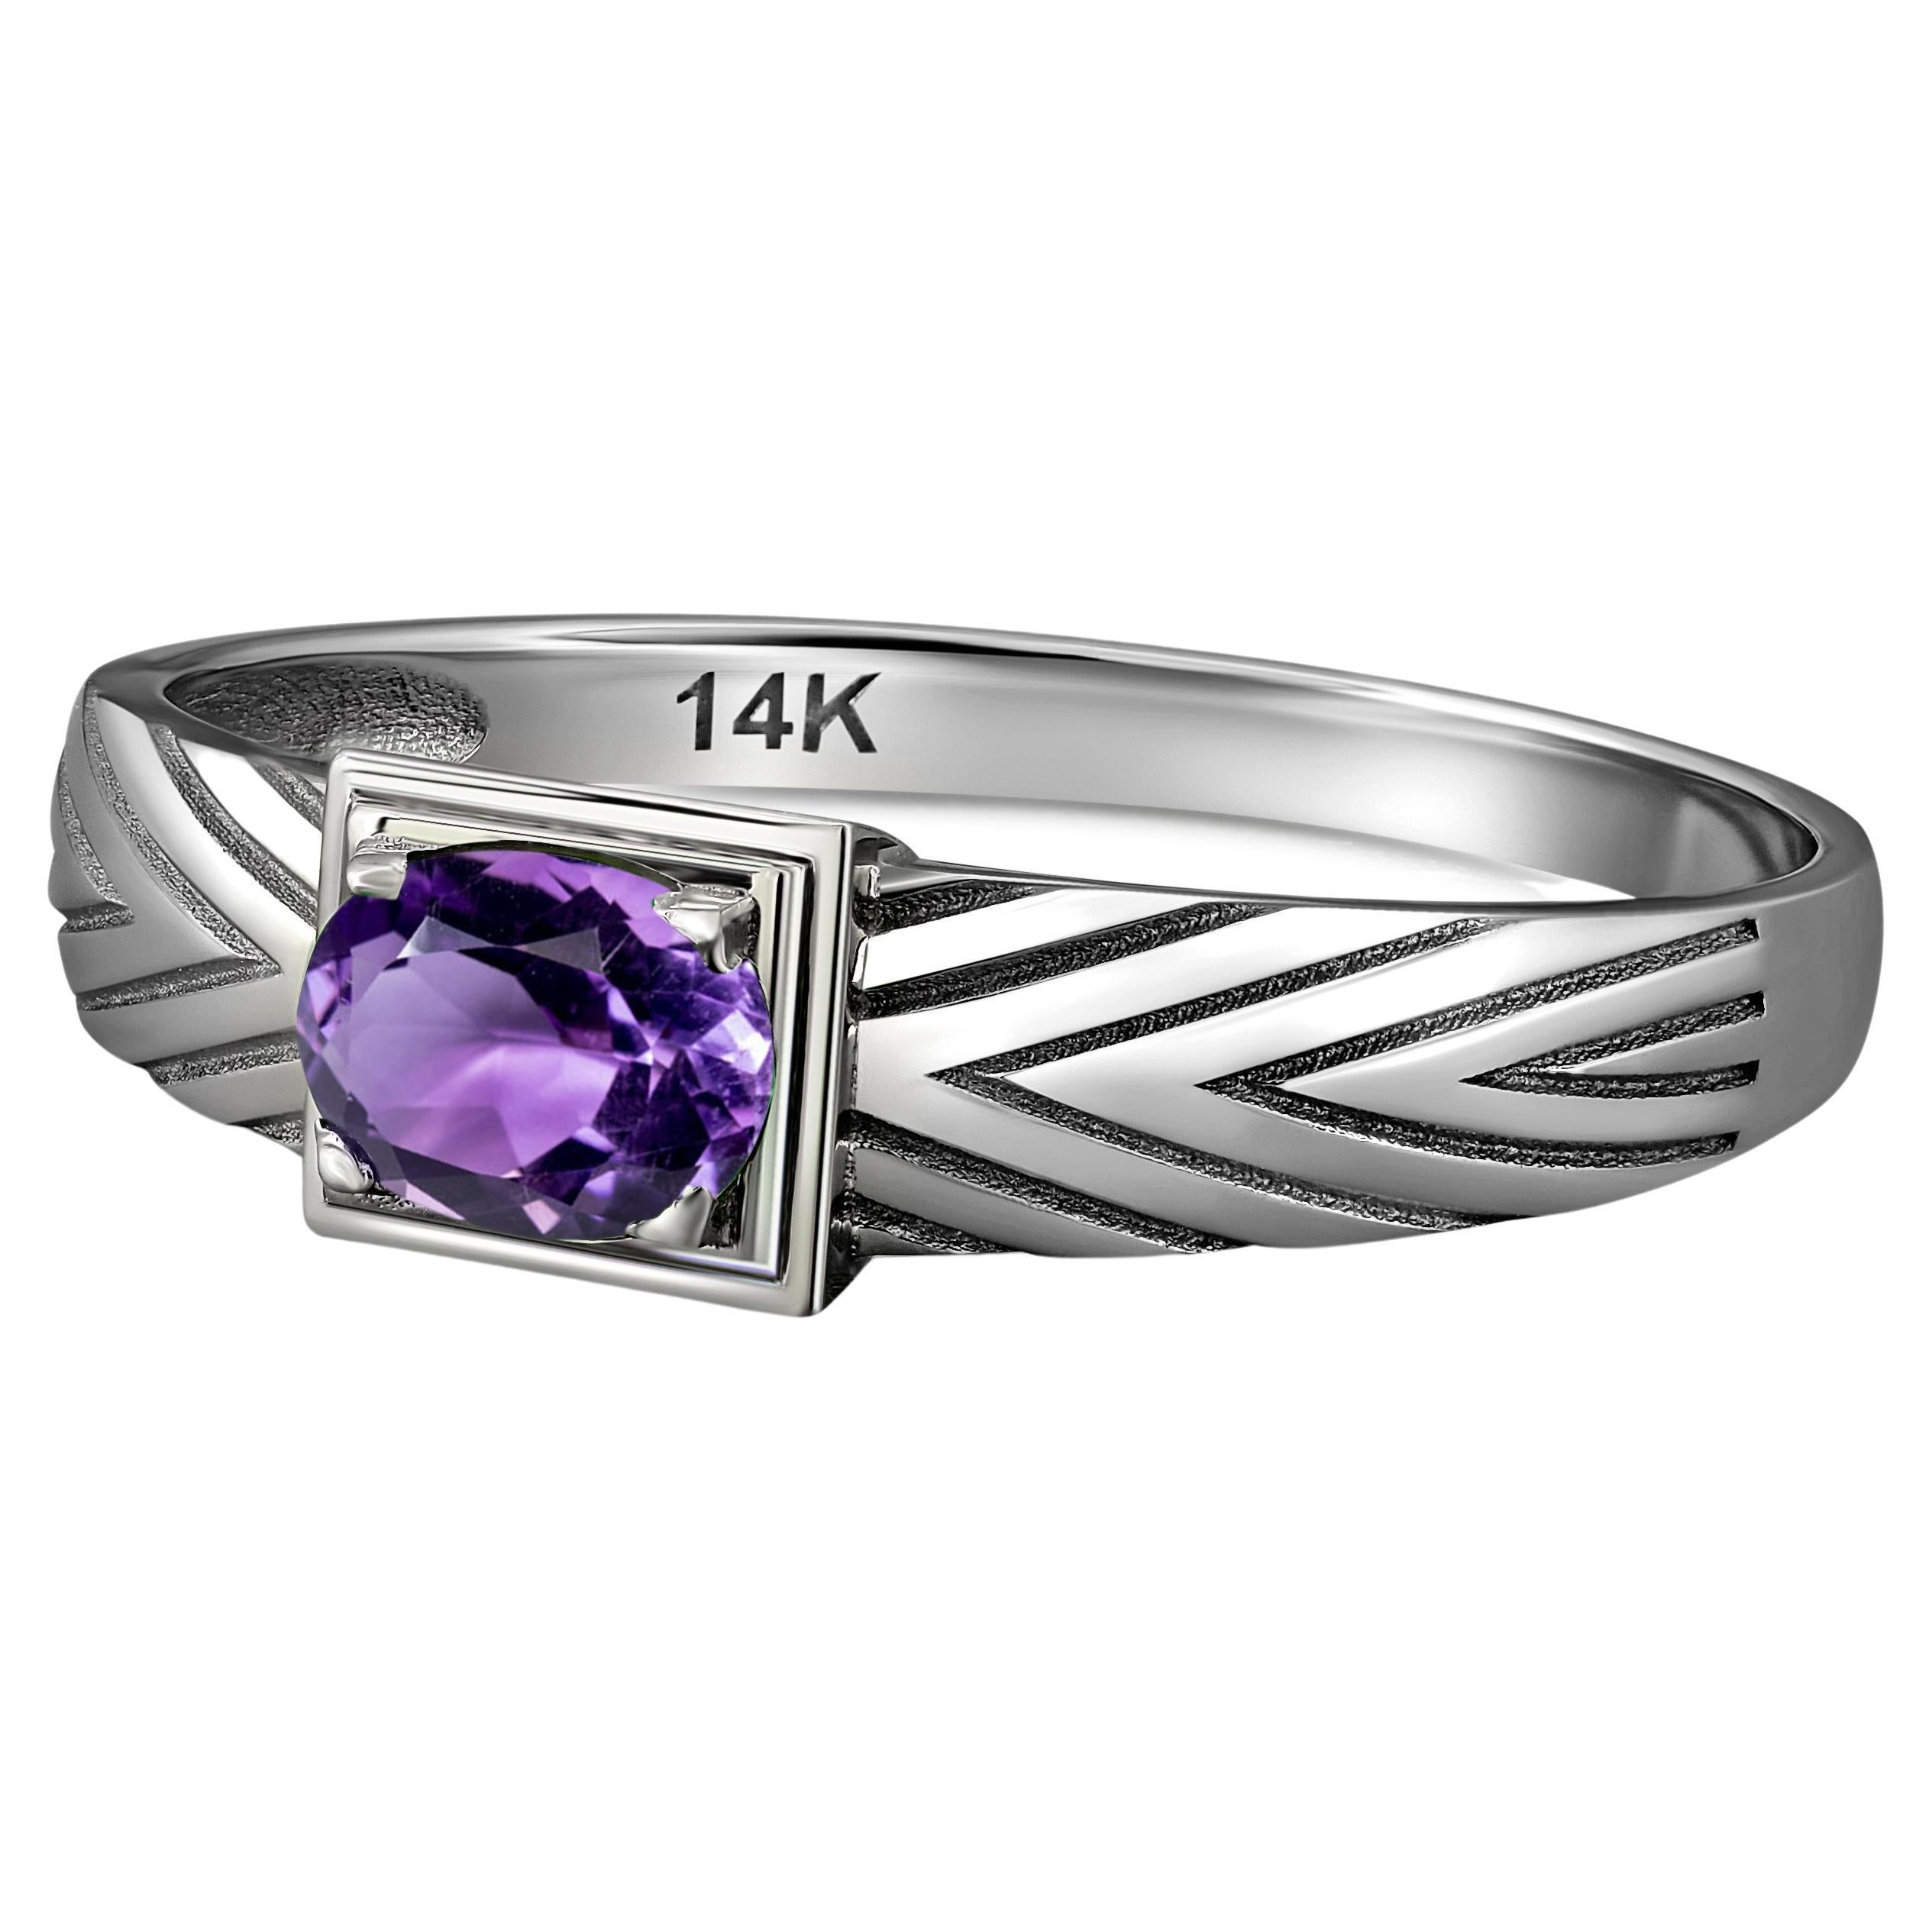 14K Gold Mens Ring with Amethyst.  For Sale